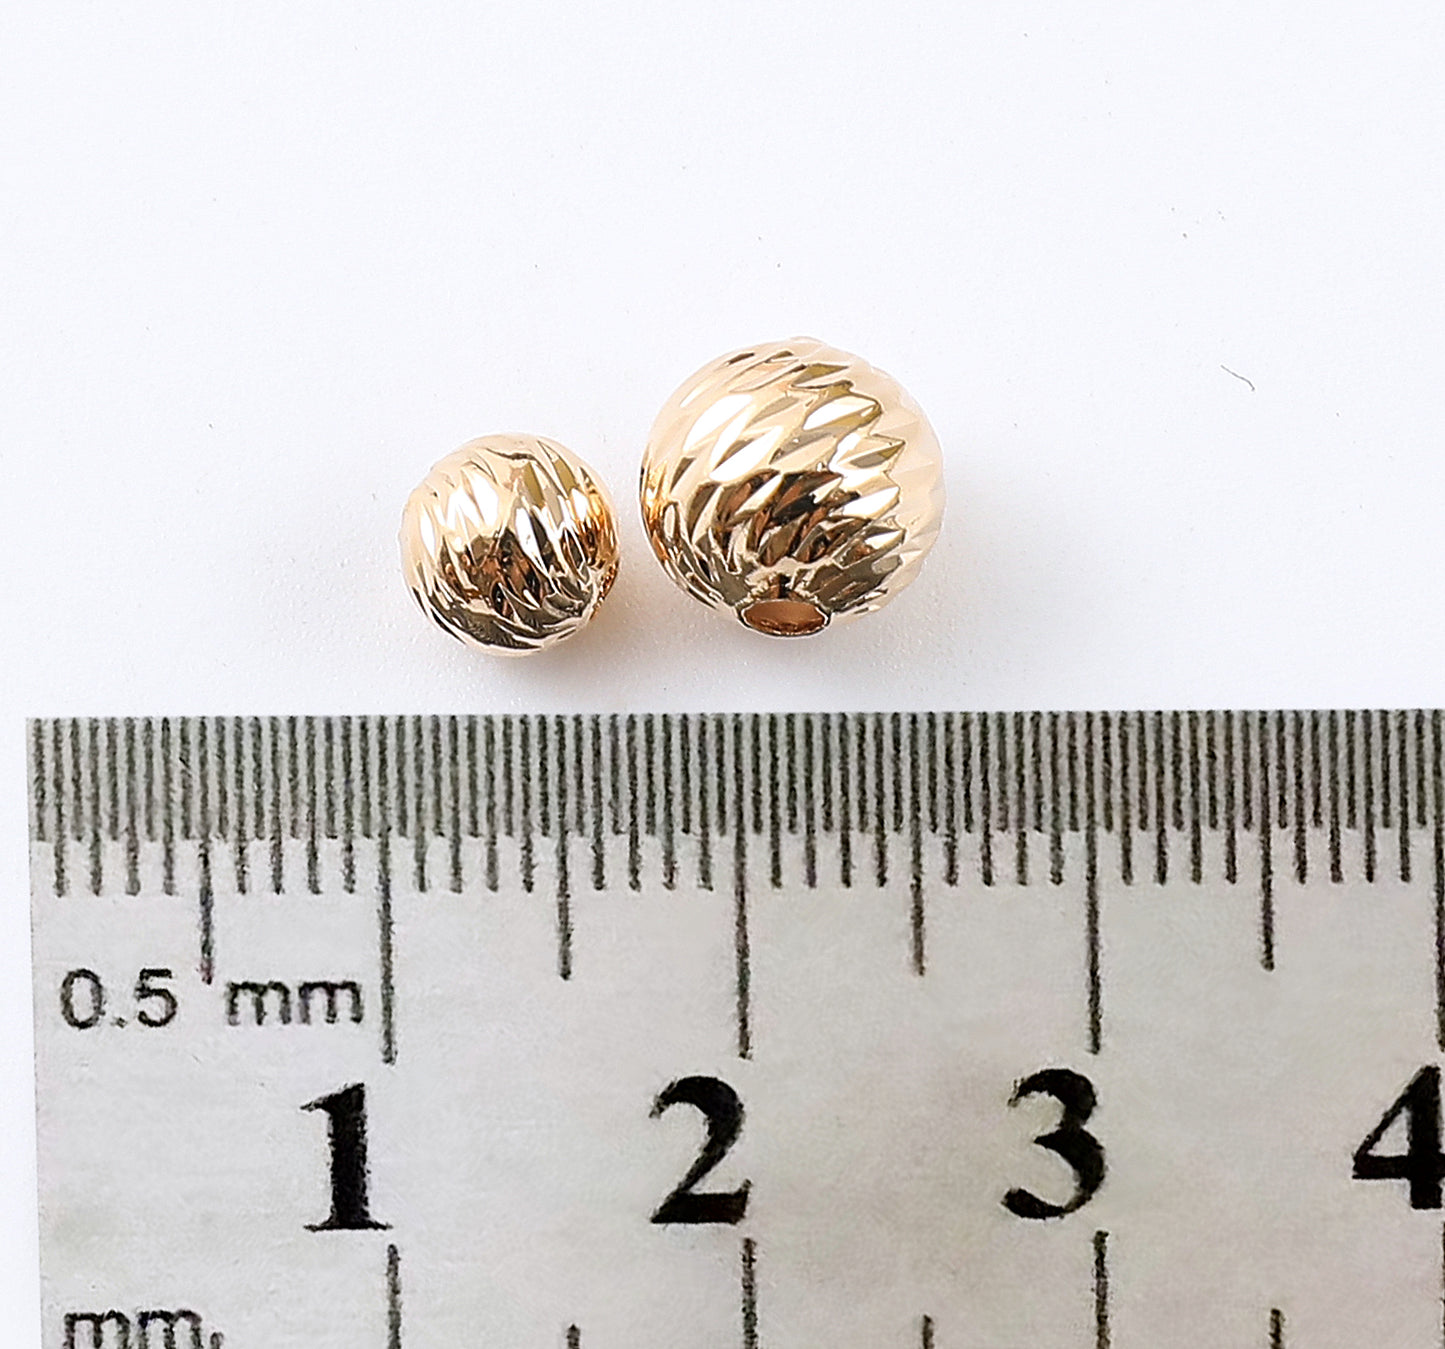 Gold Filled Water proof/Tarnish resistant Diamond Cut Round Beads Jewelry Findings